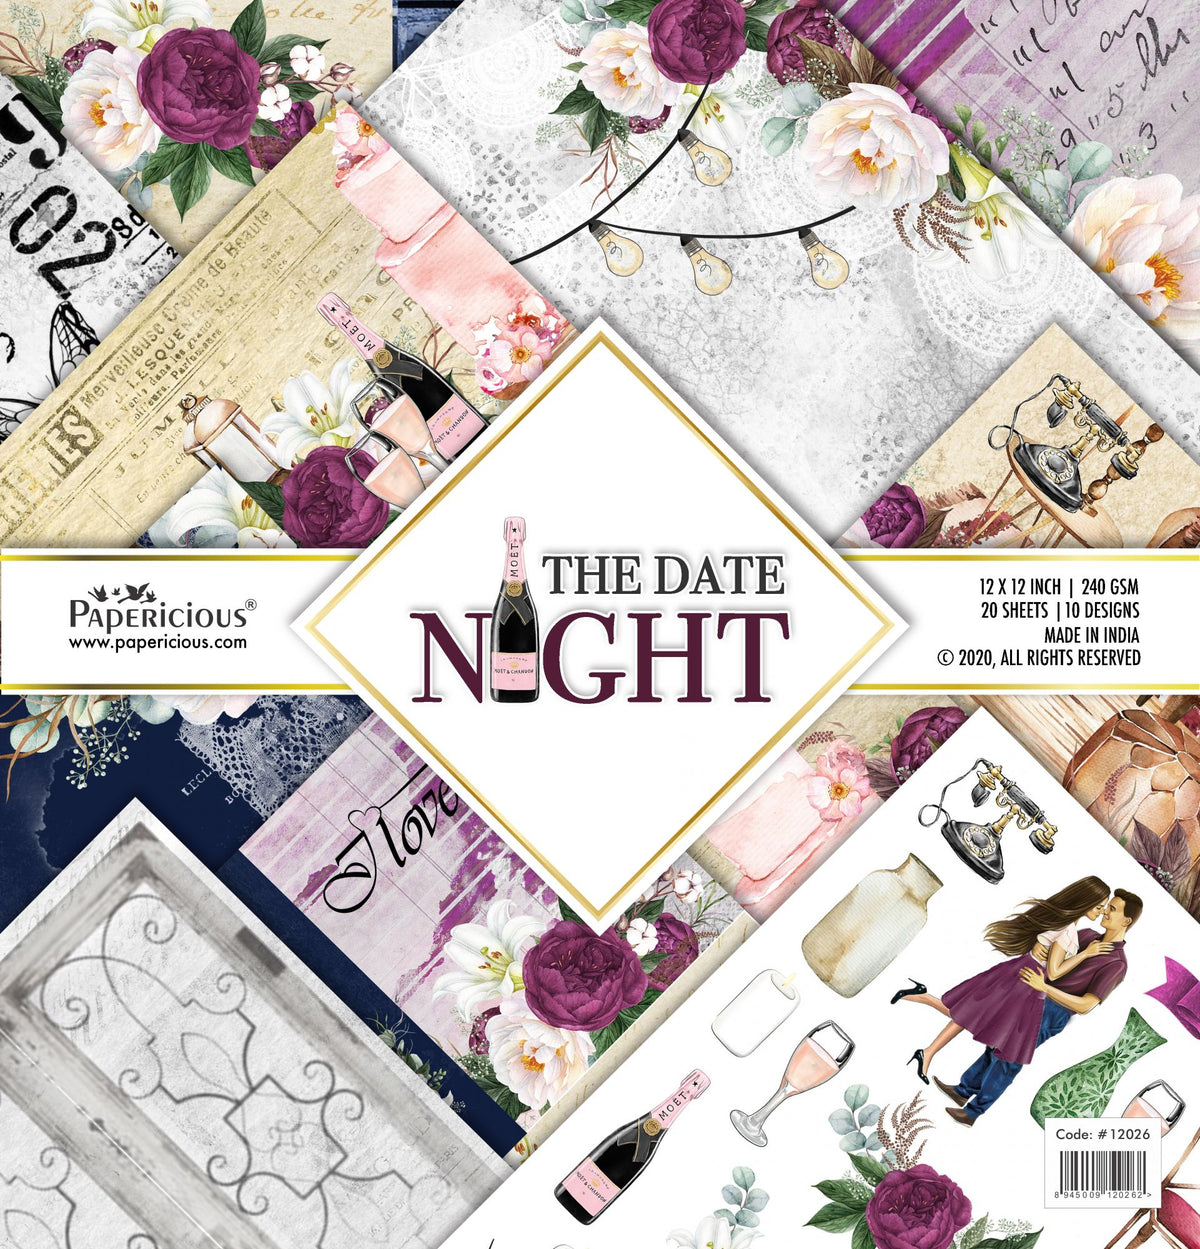 PAPERICIOUS - The Date Night -  Designer Pattern Printed Scrapbook Papers 12x12 inch  / 20 sheets